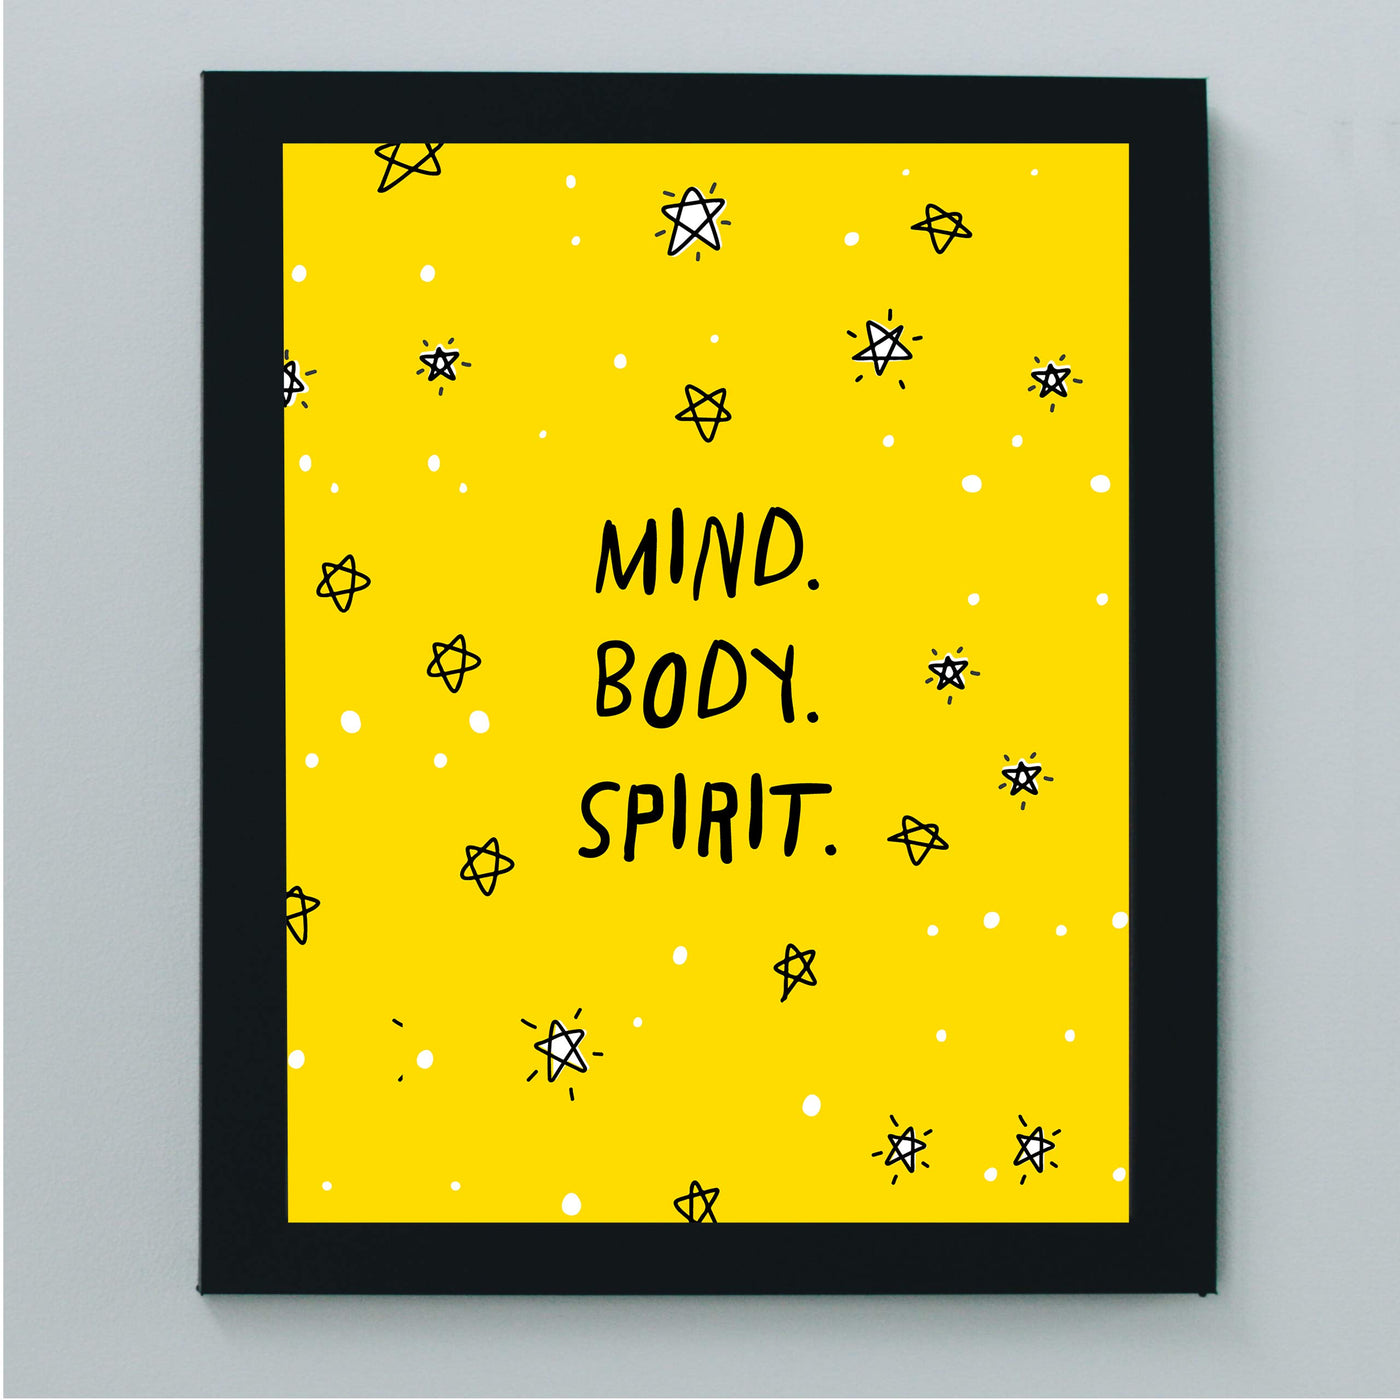 ?Mind-Body-Spirit?-Motivational Quotes Wall Art-8 x 10" Typographic Spiritual Fitness Print-Ready to Frame. Inspirational Home-Office-Gym-Studio Decor. Perfect Zen Sign for Mindfulness & Meditation!